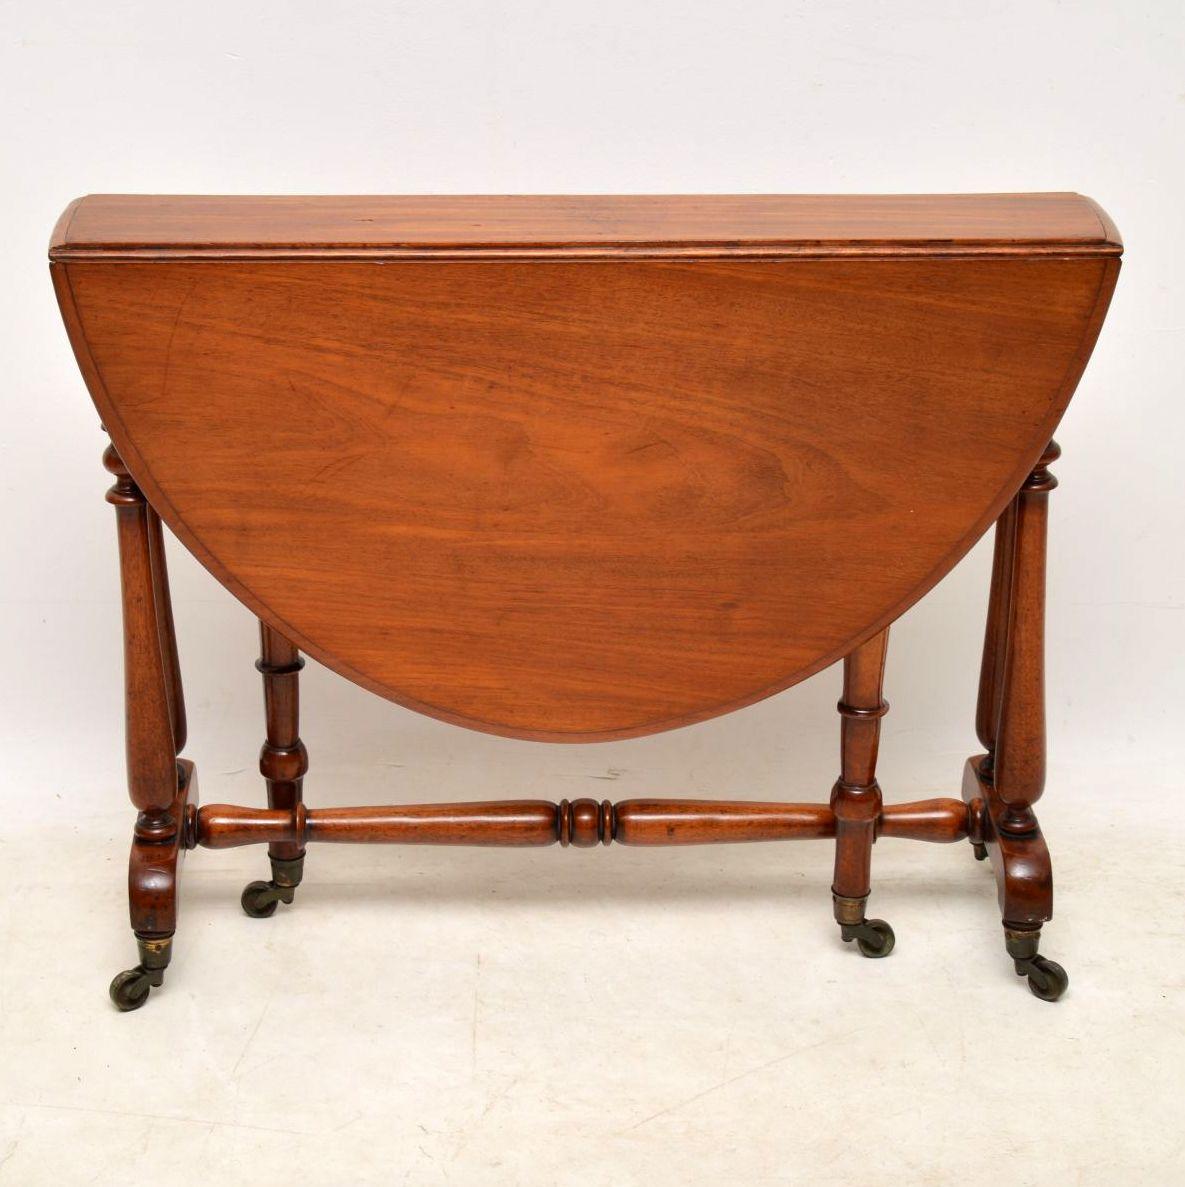 Early Victorian Antique Victorian Mahogany Drop-Leaf Sutherland Table